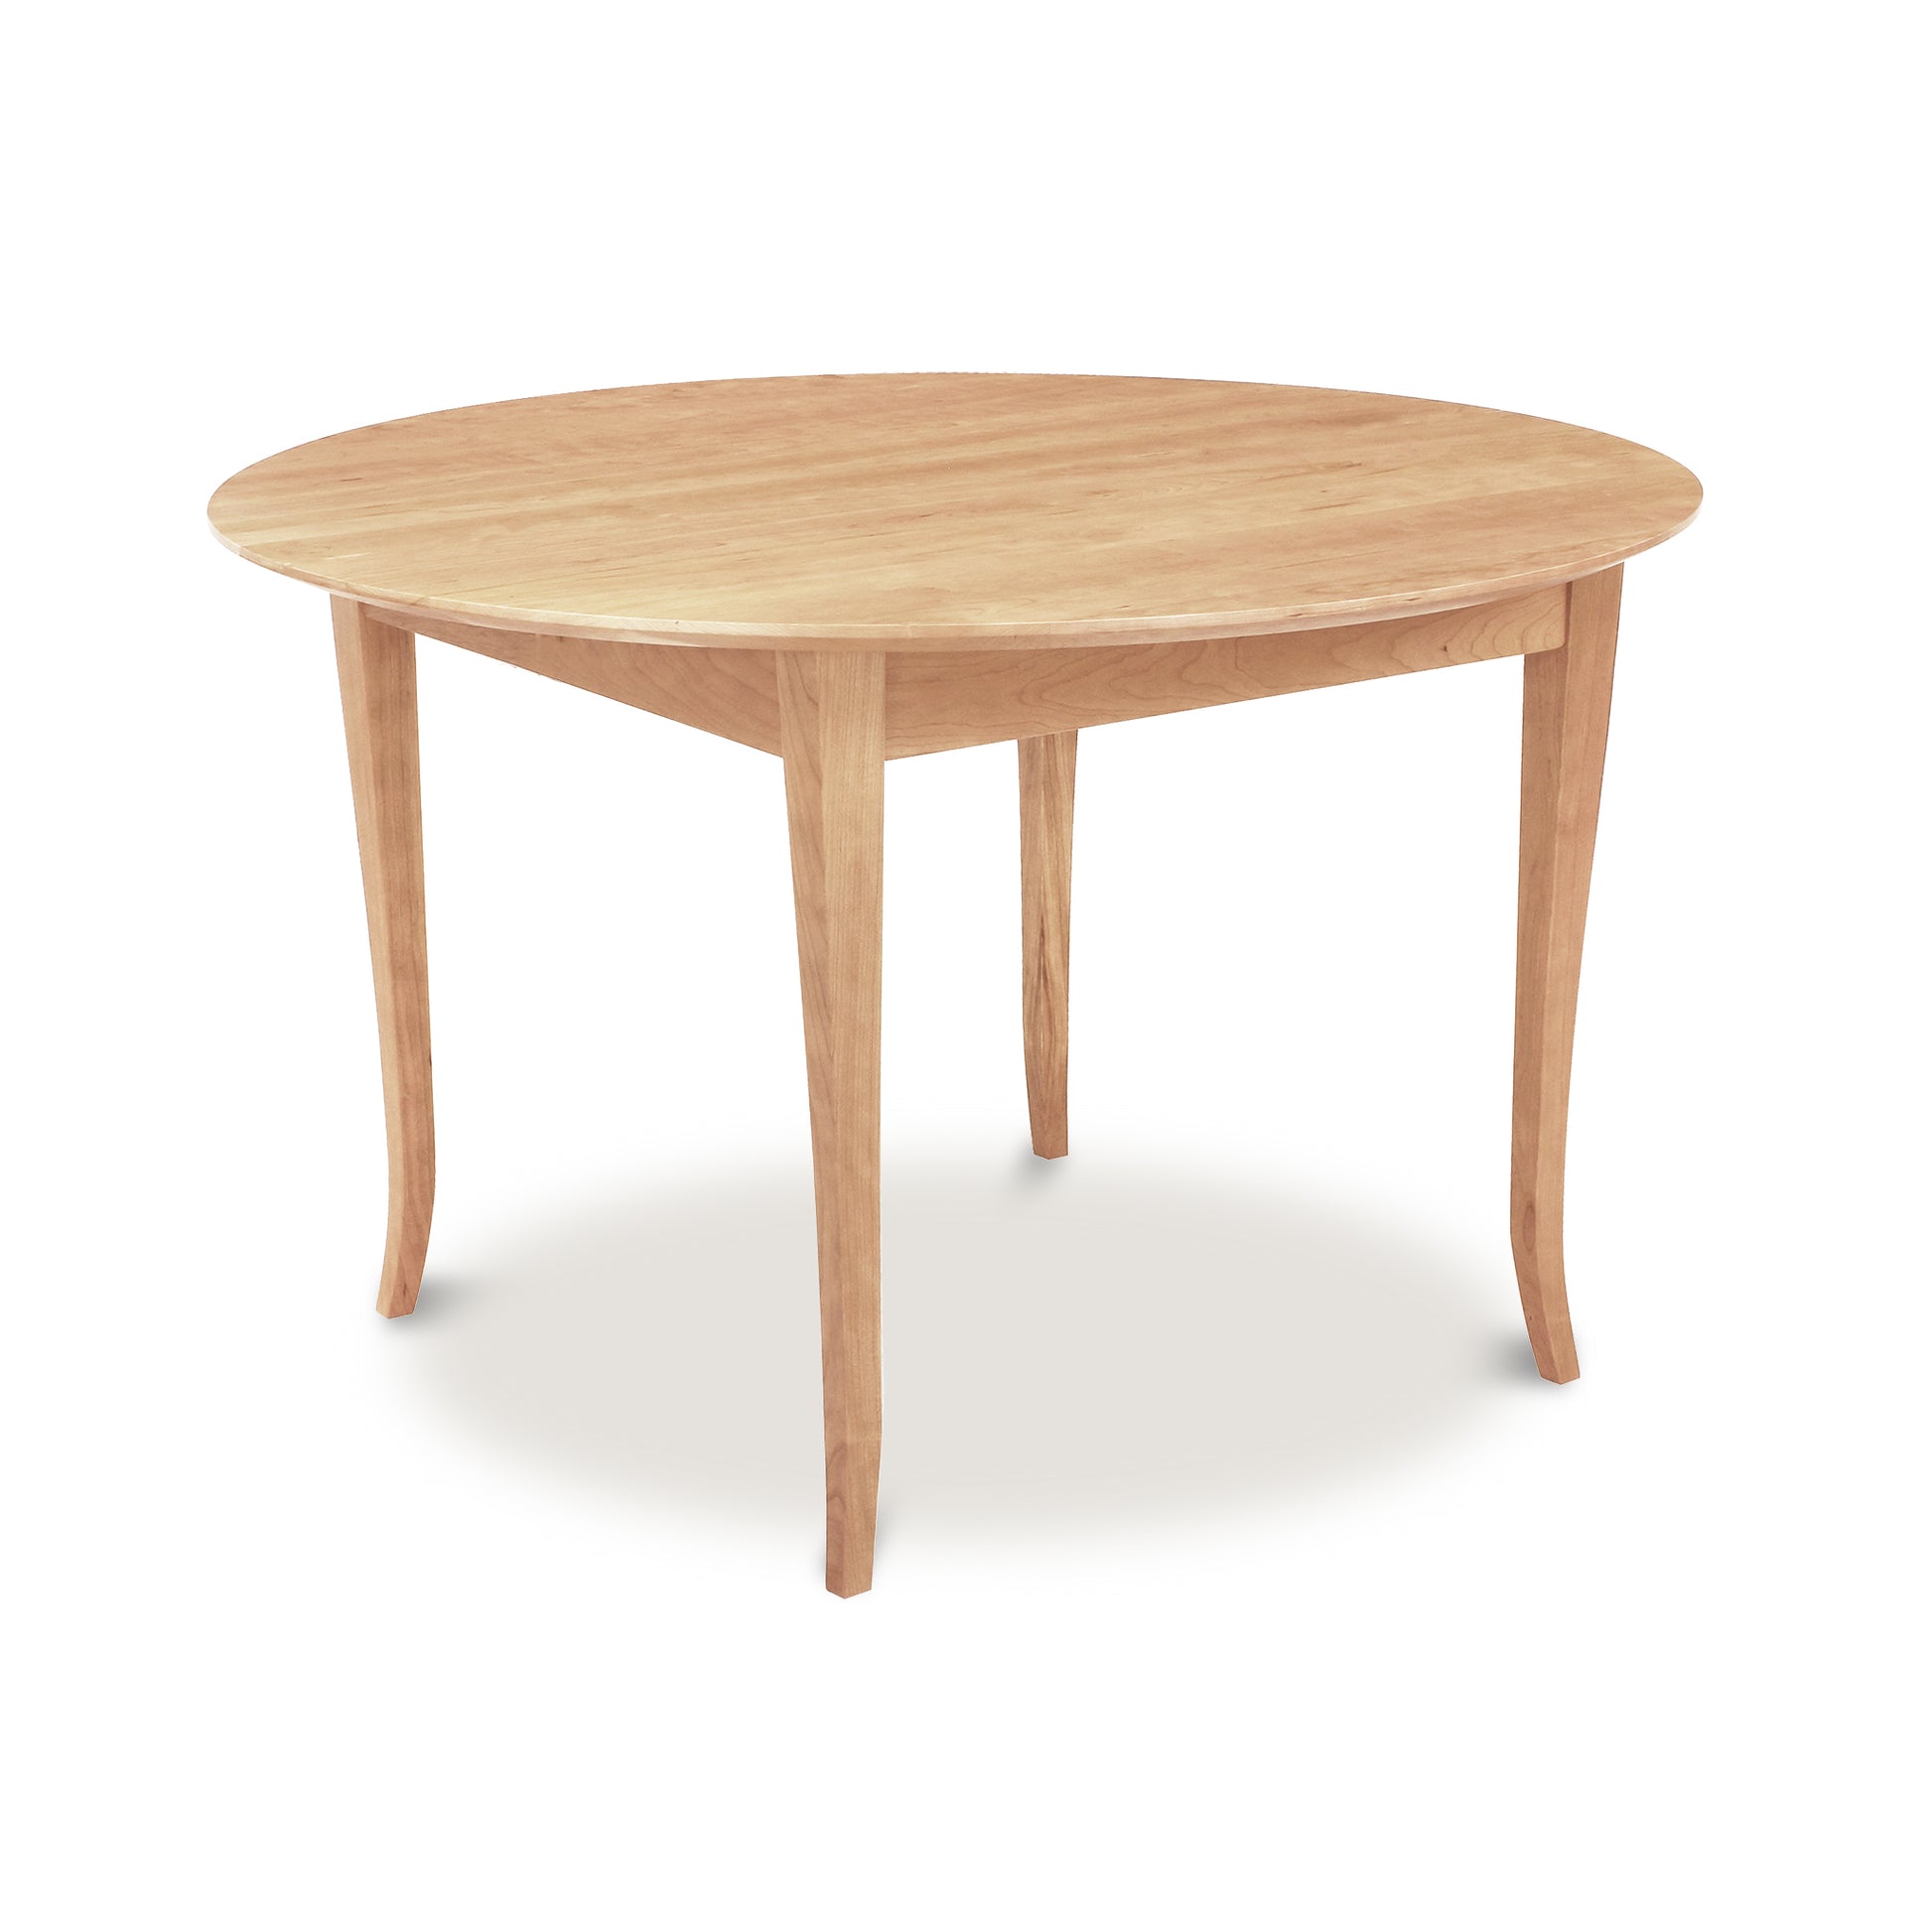 A Classic Shaker Flare Leg Round Solid Top Table with a wooden base crafted from solid hardwoods by Lyndon Furniture.